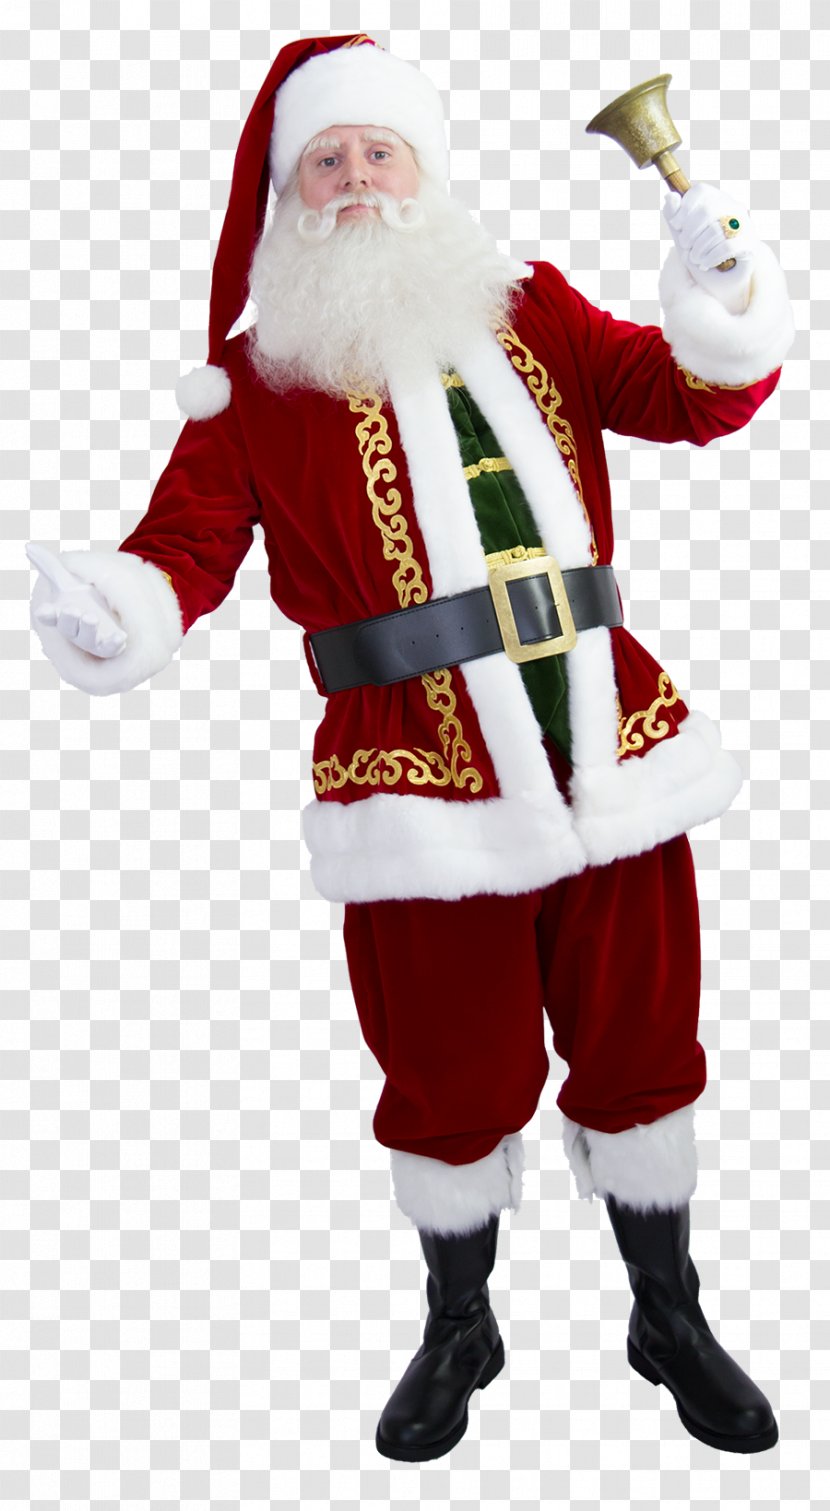 Santa Claus Costume Christmas Ornament Sled - Wig Transparent PNG